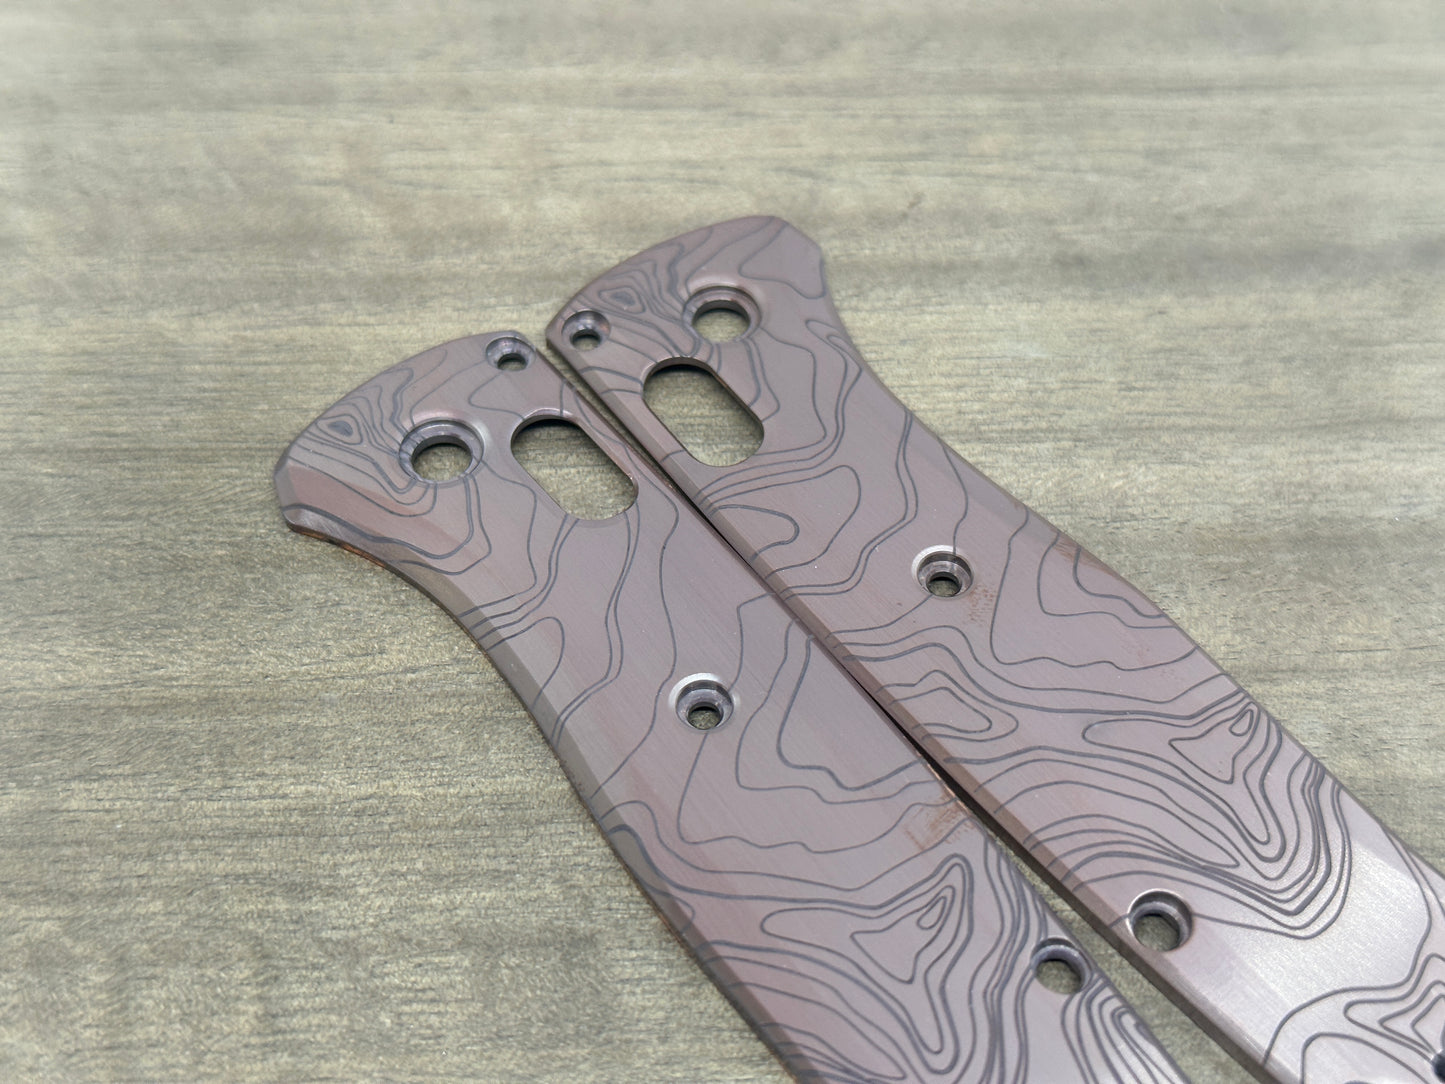 Dark TOPO engraved Copper Scales for Benchmade Bugout 535